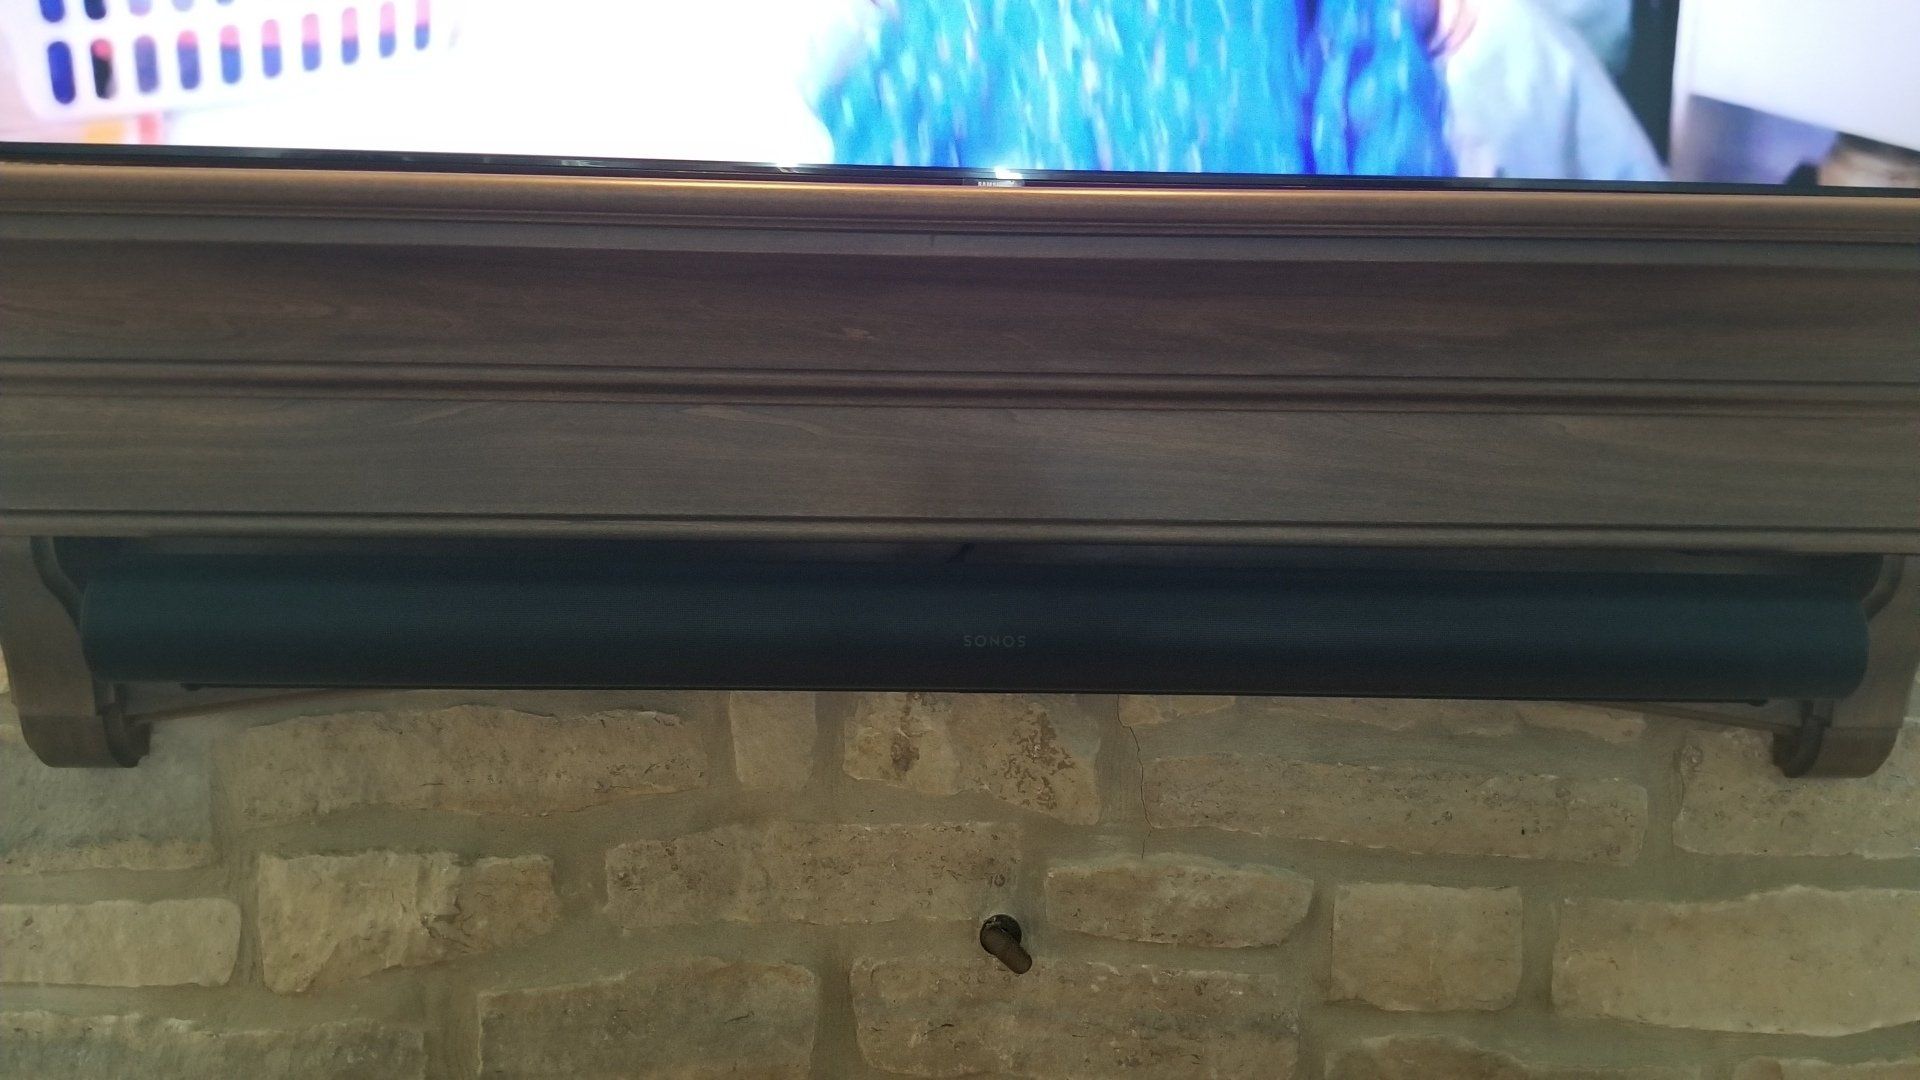 a tv is mounted on a mantle above a brick wall with a sonos arc soundbar custom mounted to the mantle. This is installed by fisher electronics in northern ohio.